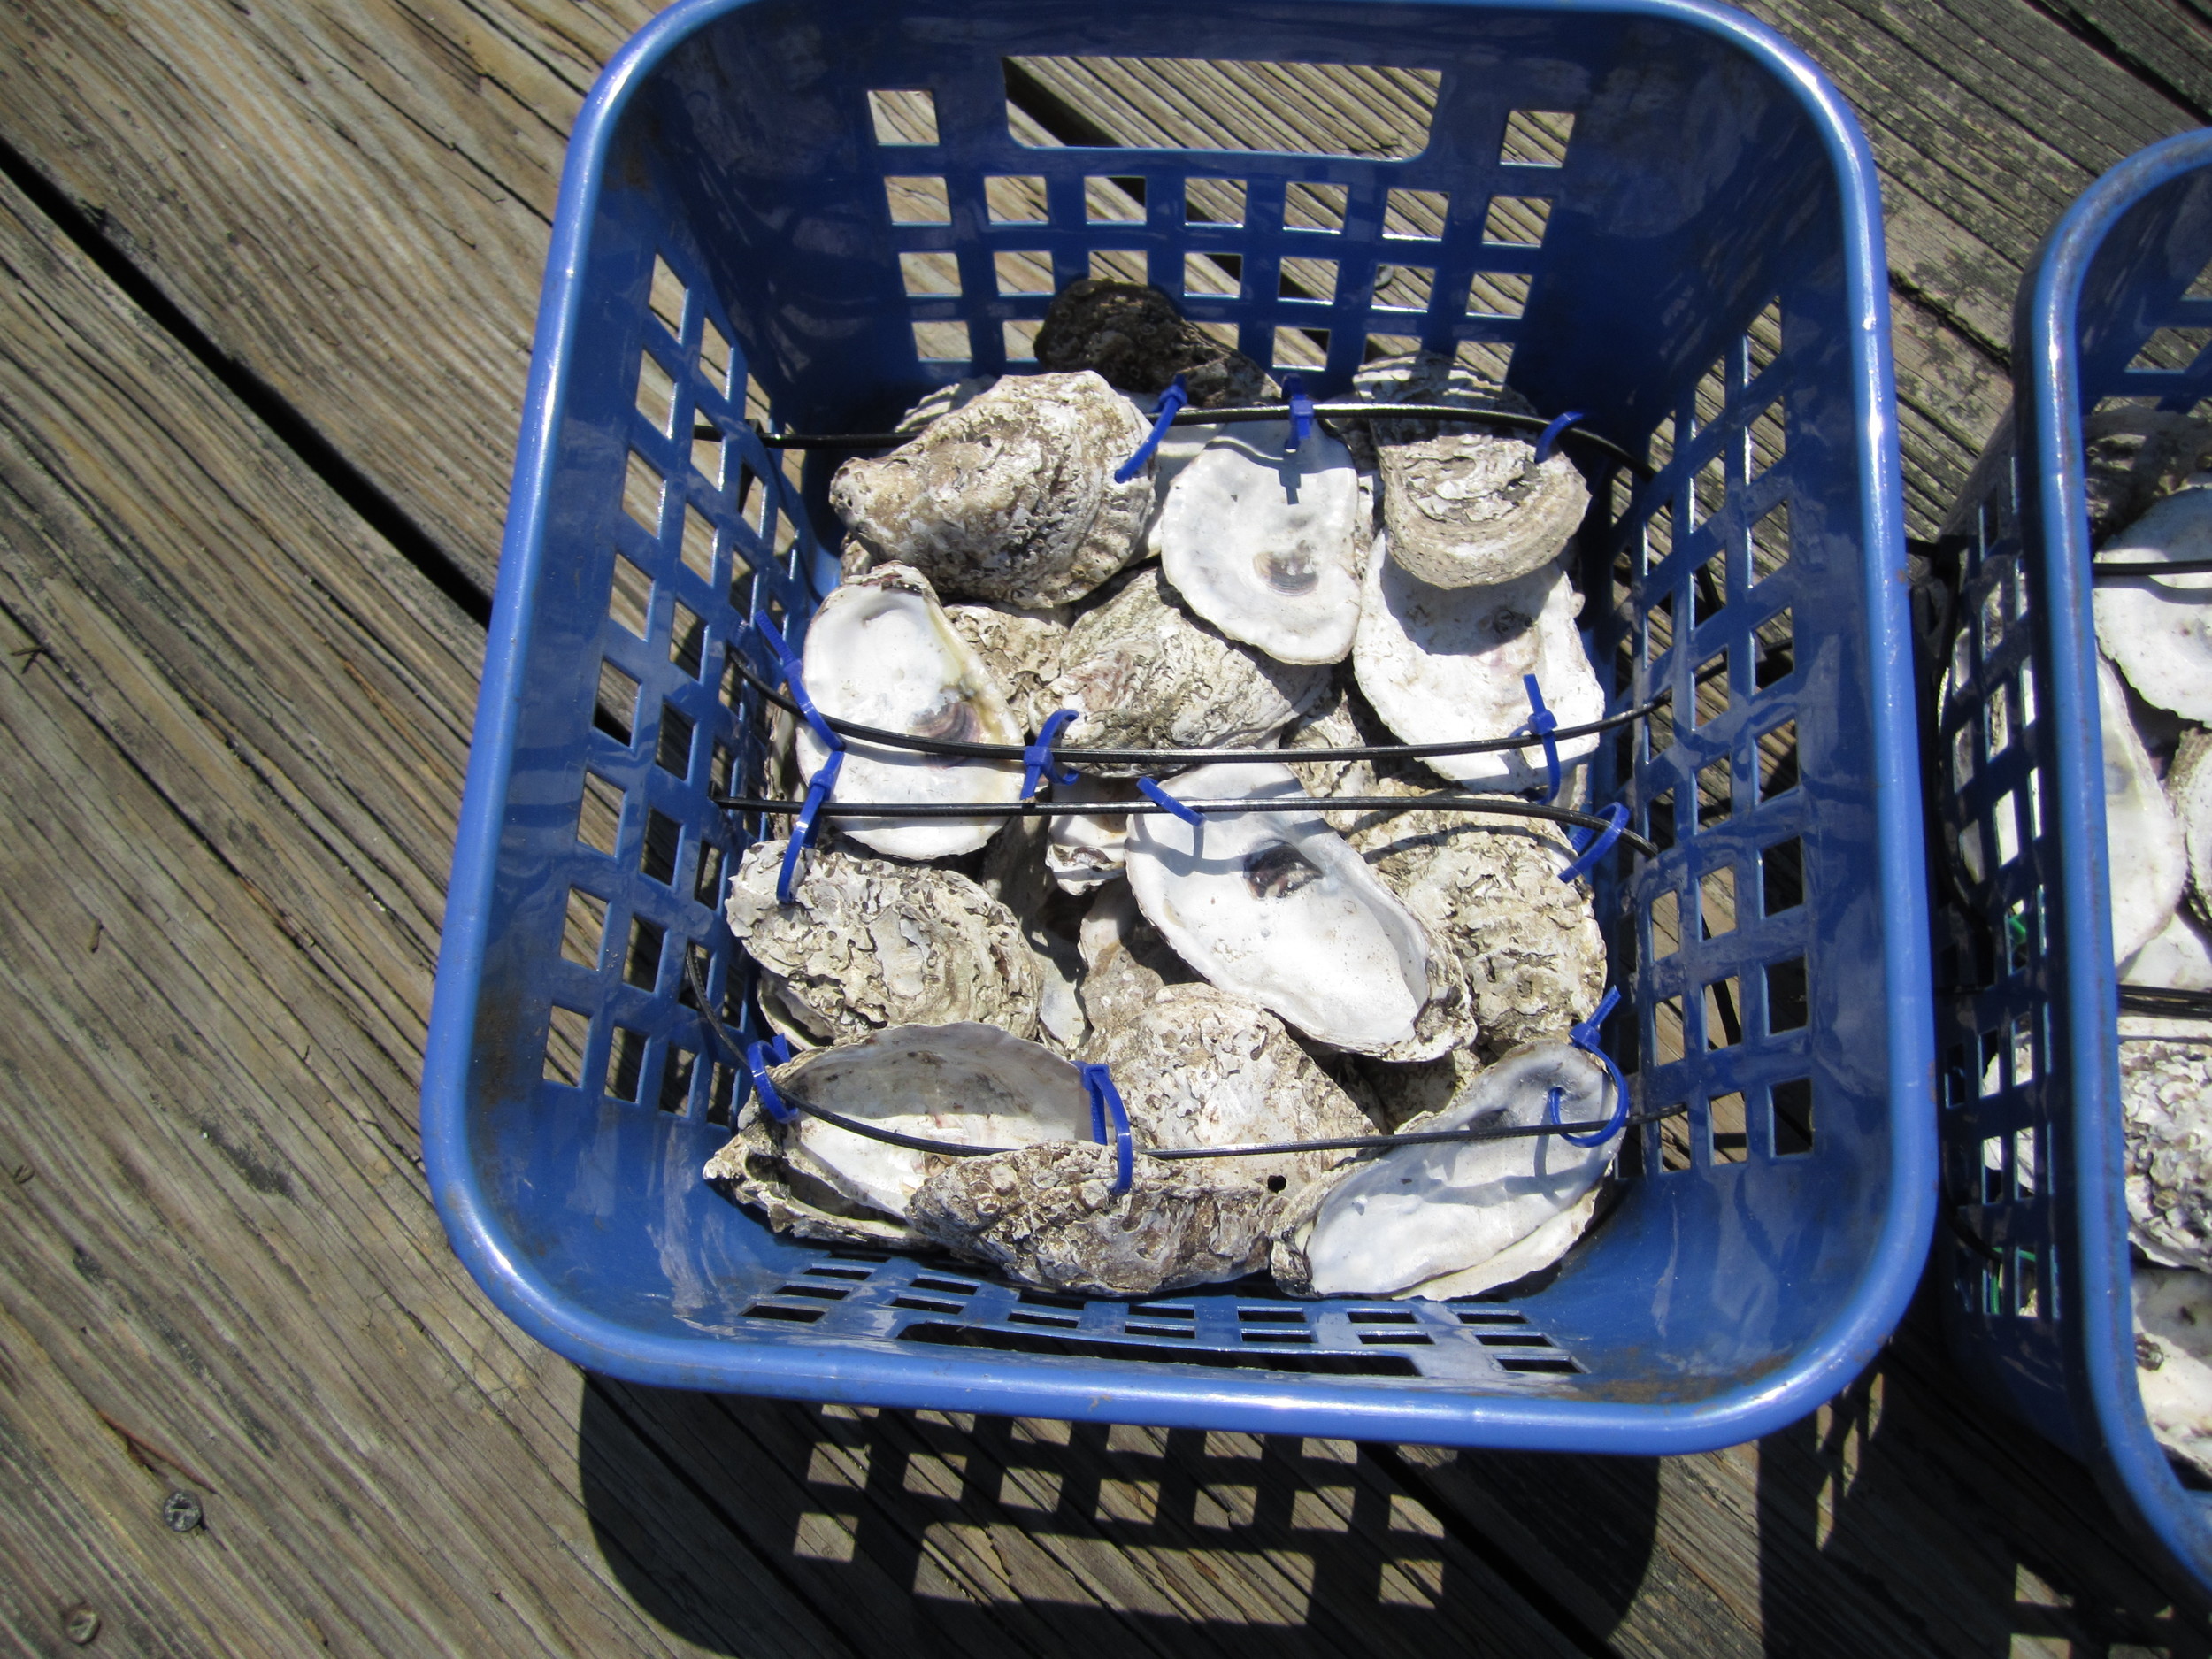 Colored cable ties serve two purposes: indicate basket deployment location and attach treatment oysters to basket